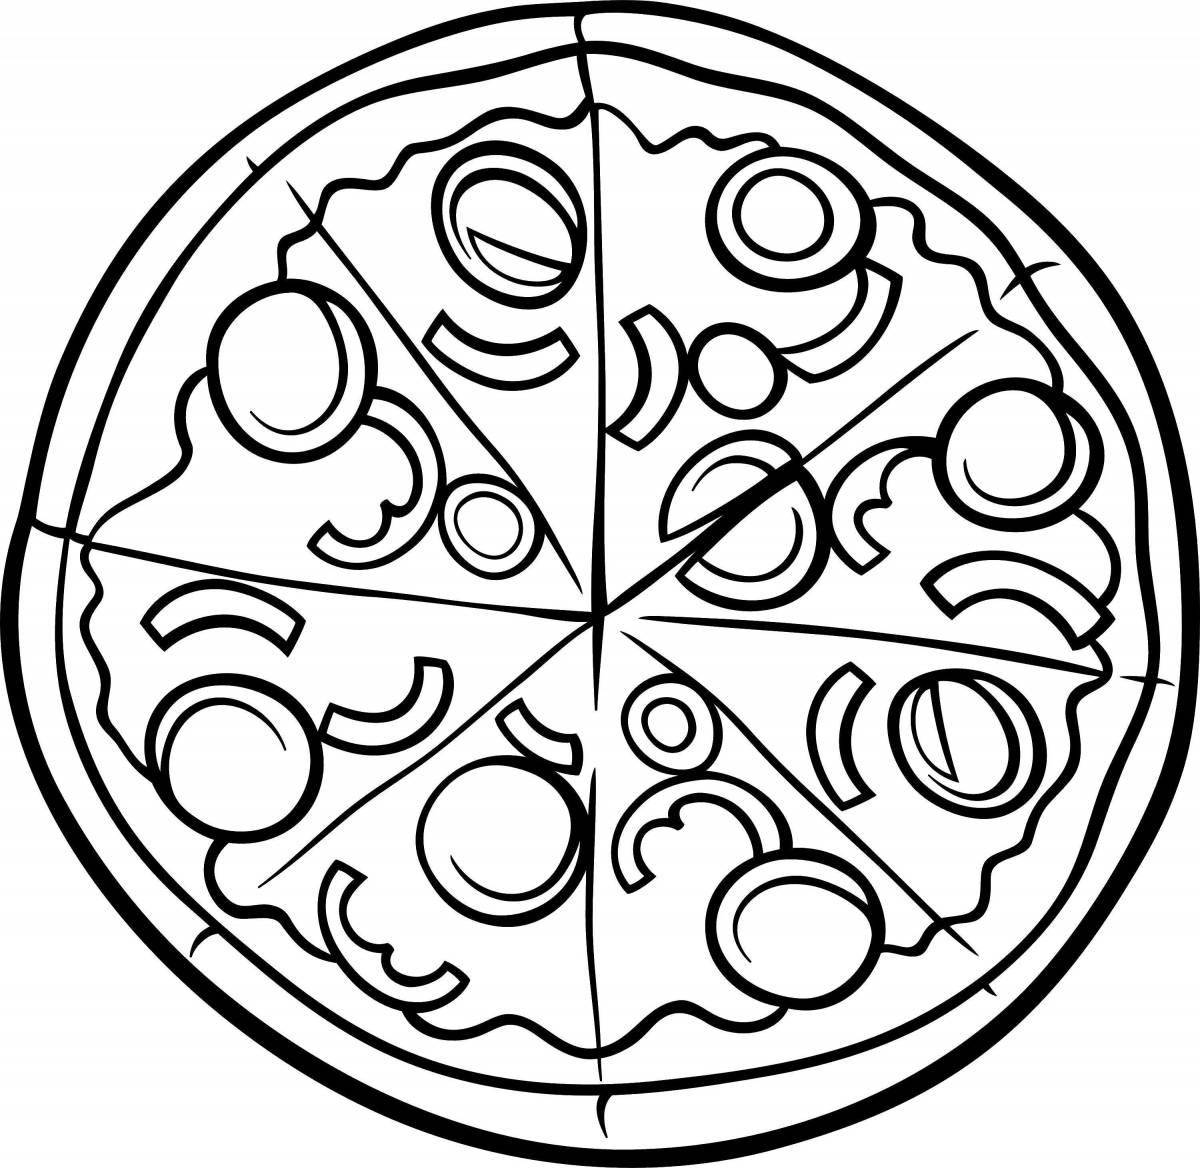 Sky pizza coloring page